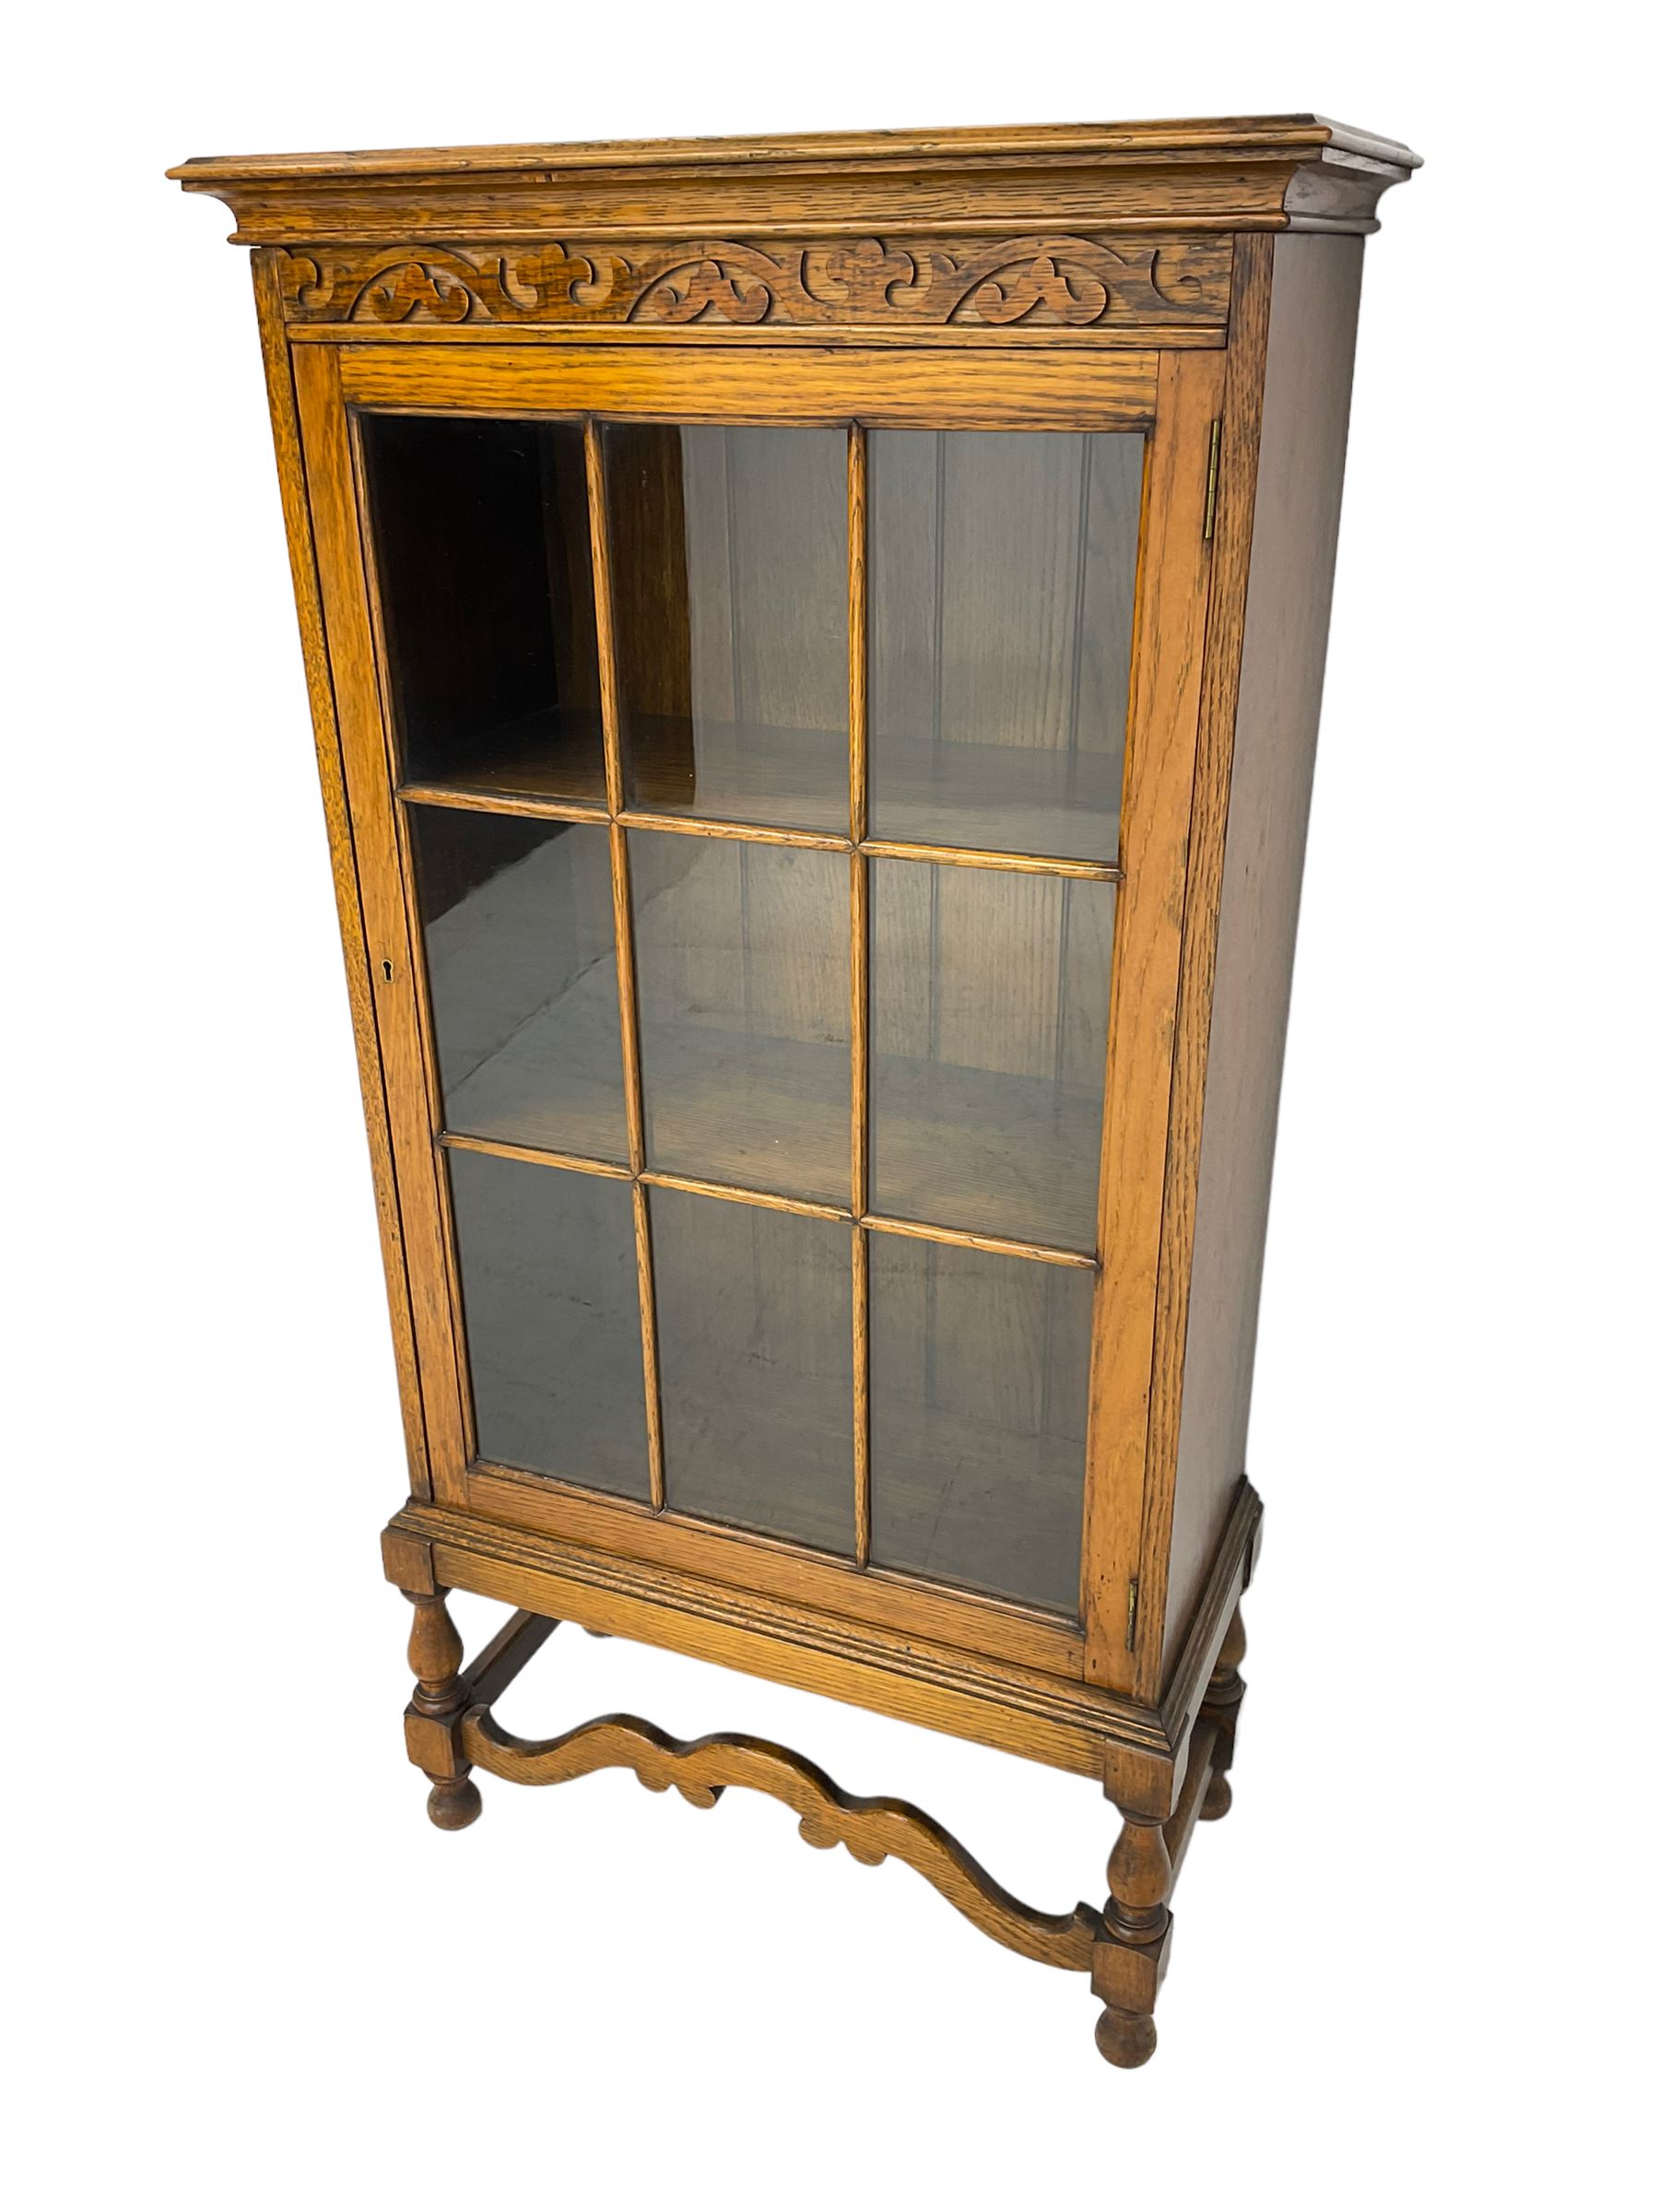 Early 20th century oak bookcase display cabinet - Image 6 of 6